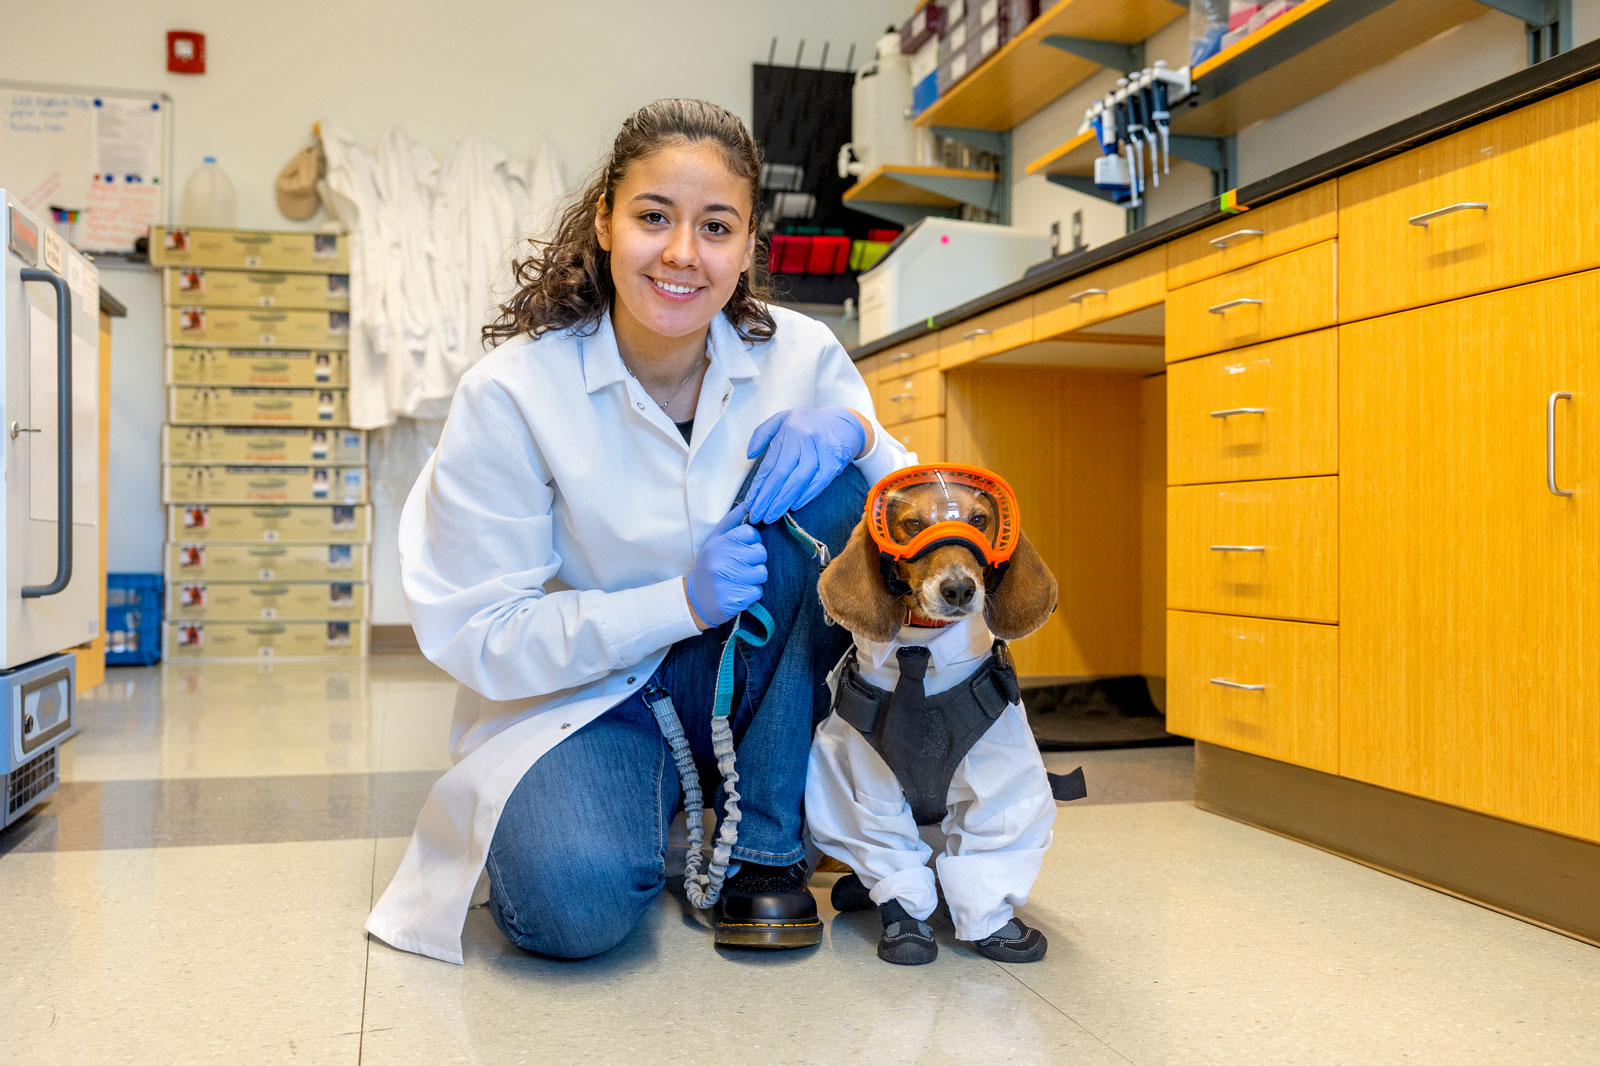 Genesis Contreras and her service dog in the lab